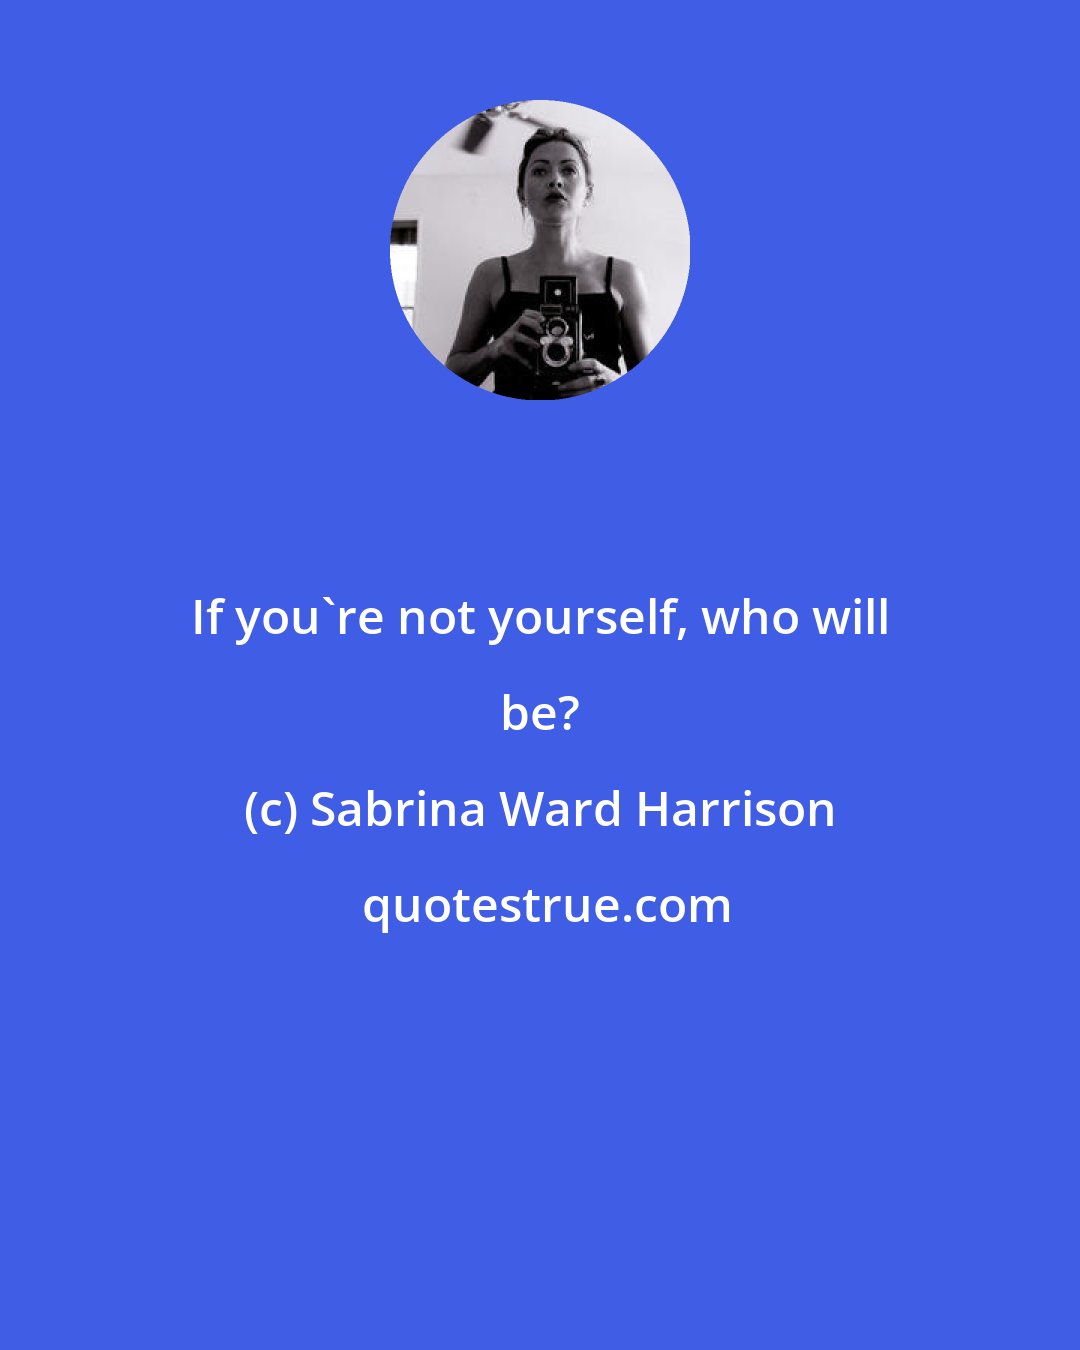 Sabrina Ward Harrison: If you're not yourself, who will be?